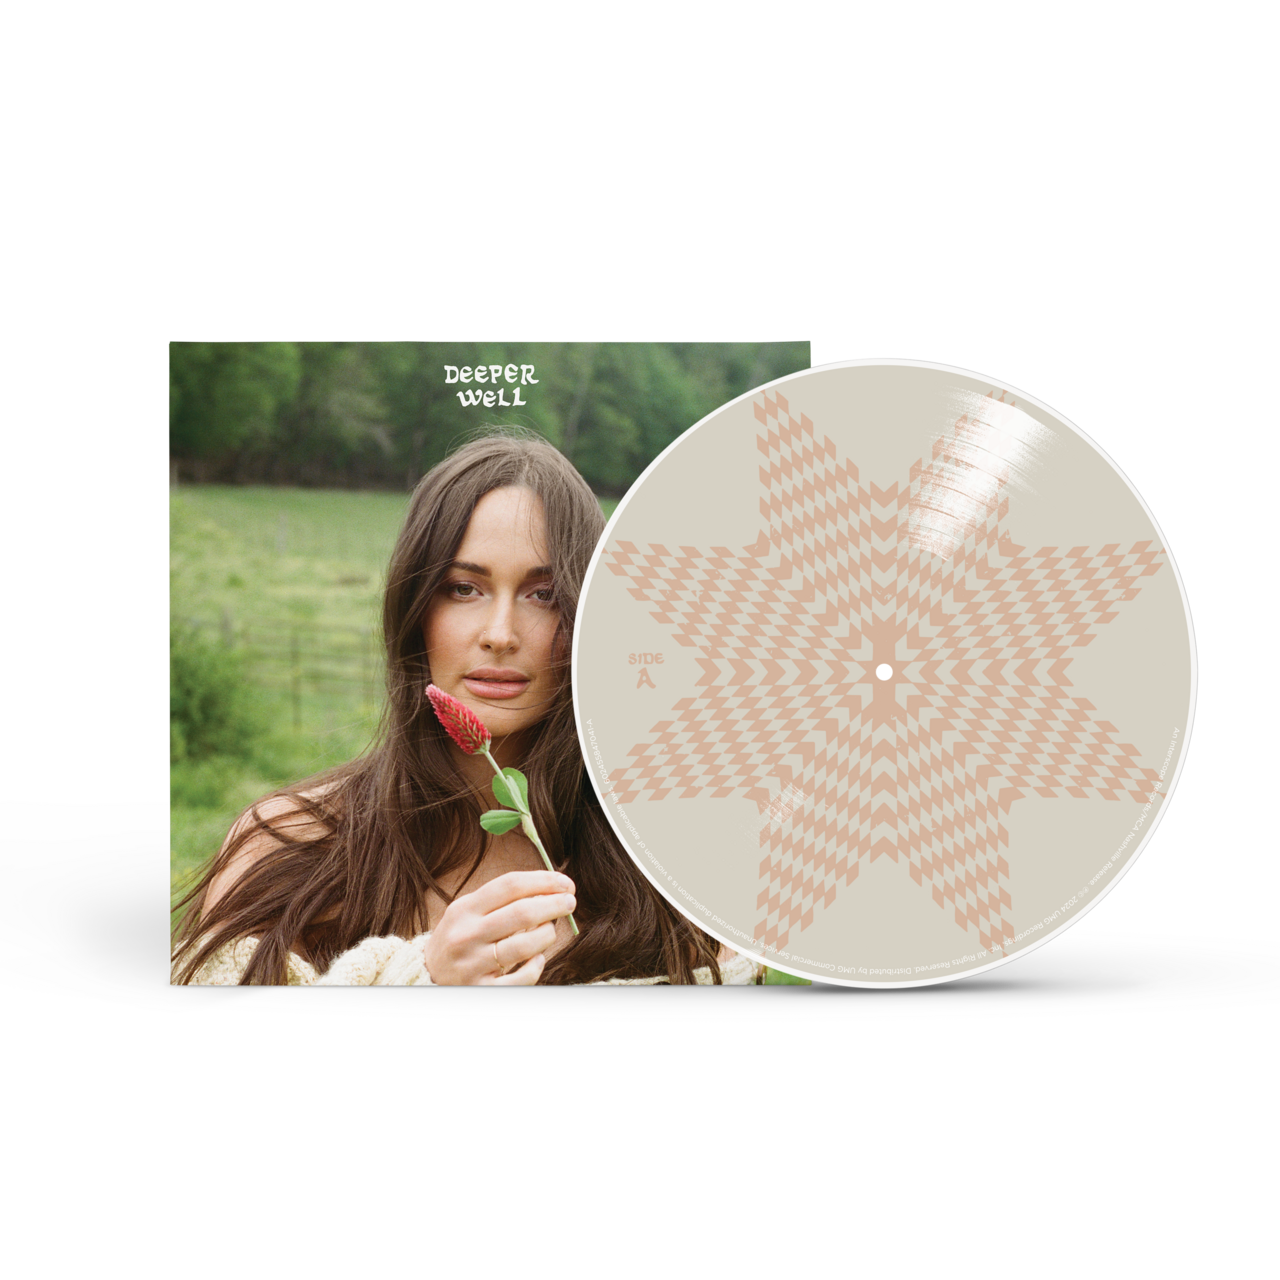 Deeper Well: Quilted Picture Disc Vinyl LP (Limited Collector’s Edition) + Signed Art Card